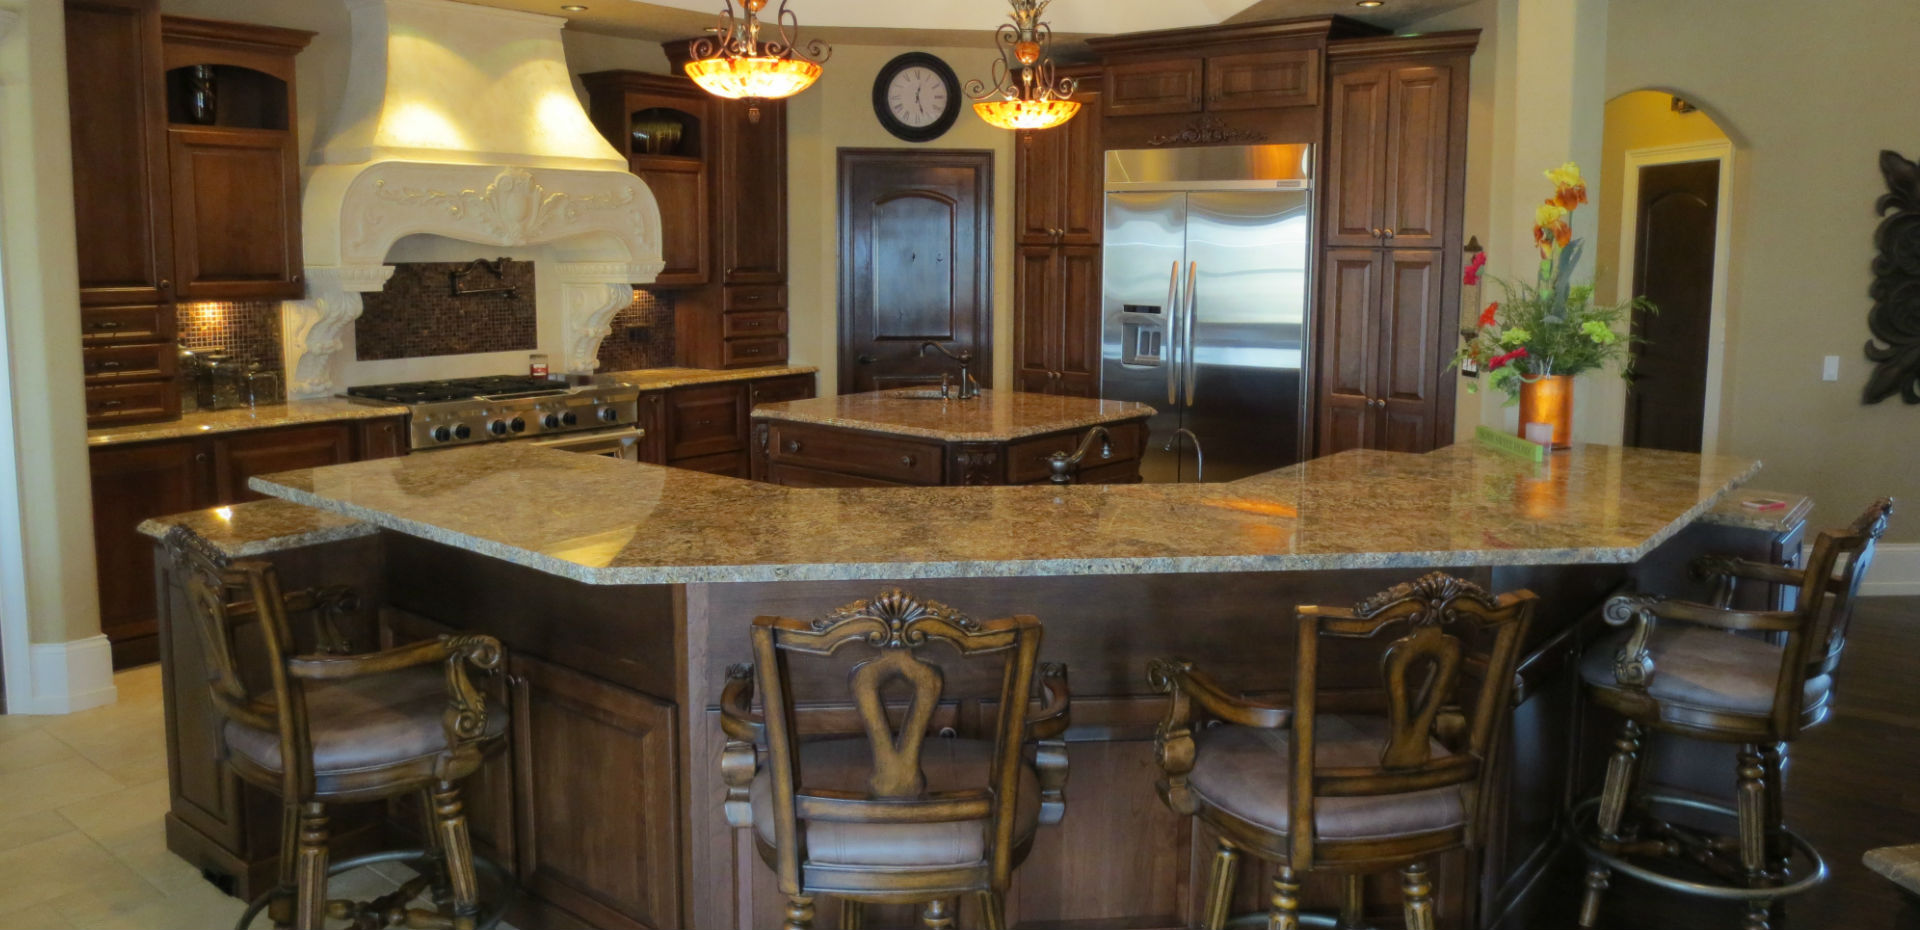 Cherrytree Kitchens 1 Countertop Installation In The Midwest